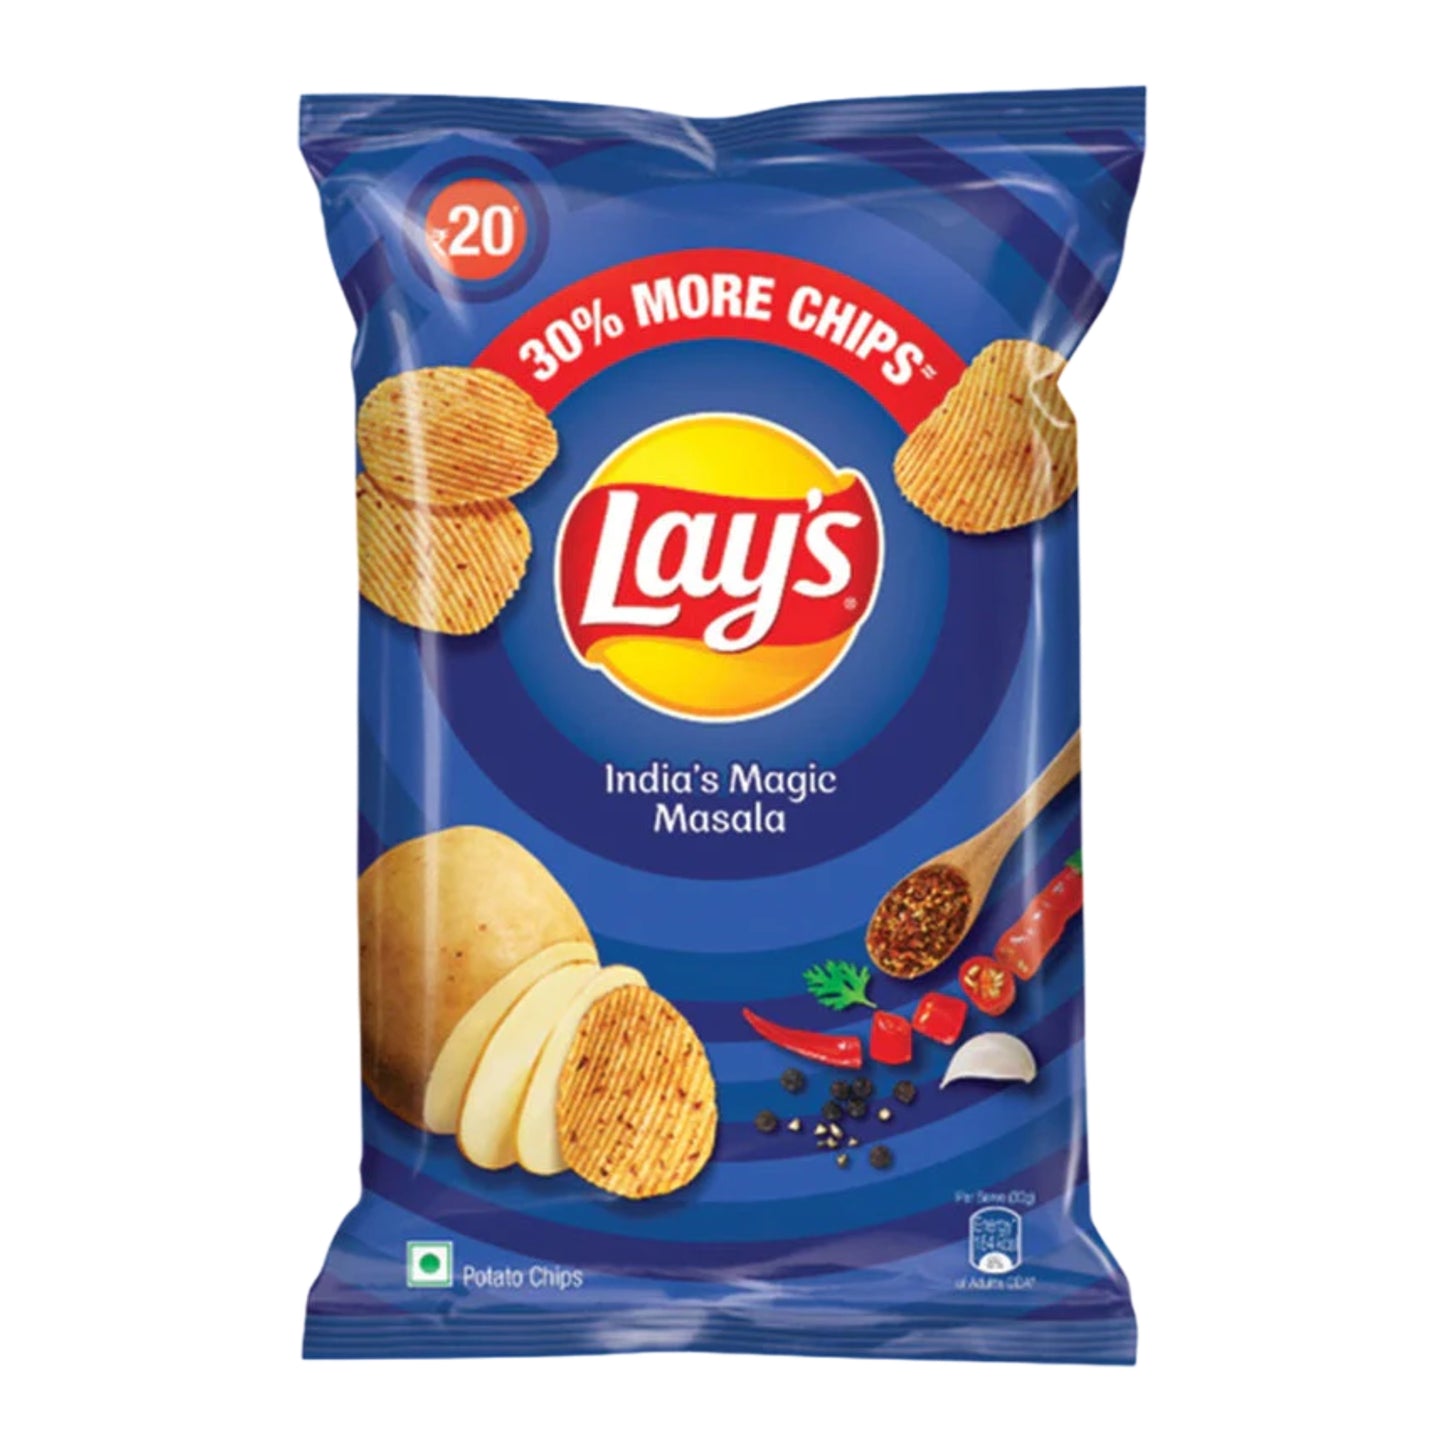 Lays Magic Masala | The Snack Pause